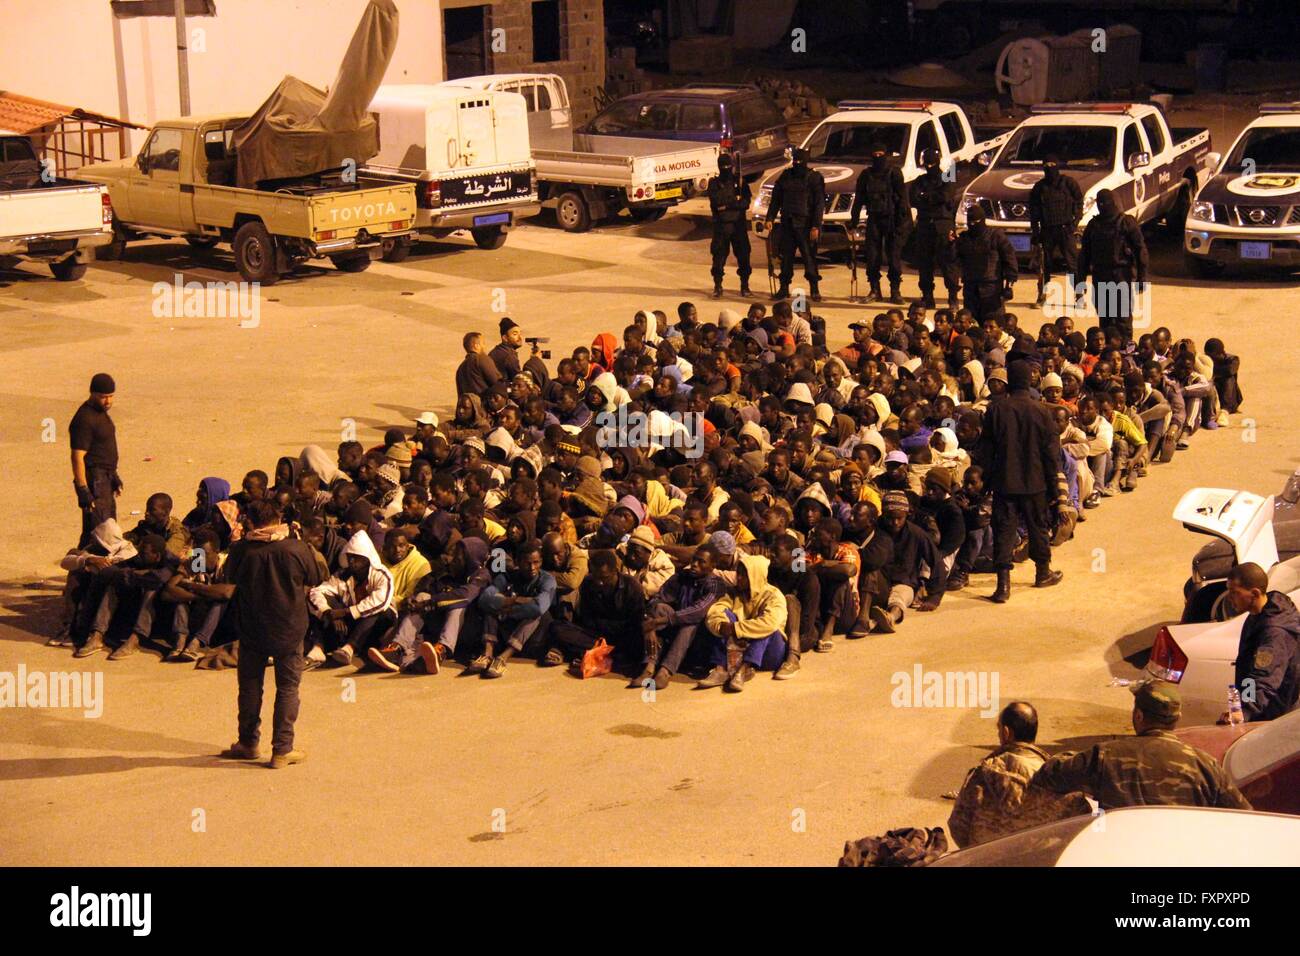 Tripoli, Libya. 17th Apr, 2016. Illegal migrants, who wanted to cross the Mediterranean to Europe, are detained by Libyan security forces during a raid in Tripoli, Libya, early April 17, 2016. © Hamza Turkia/Xinhua/Alamy Live News Stock Photo